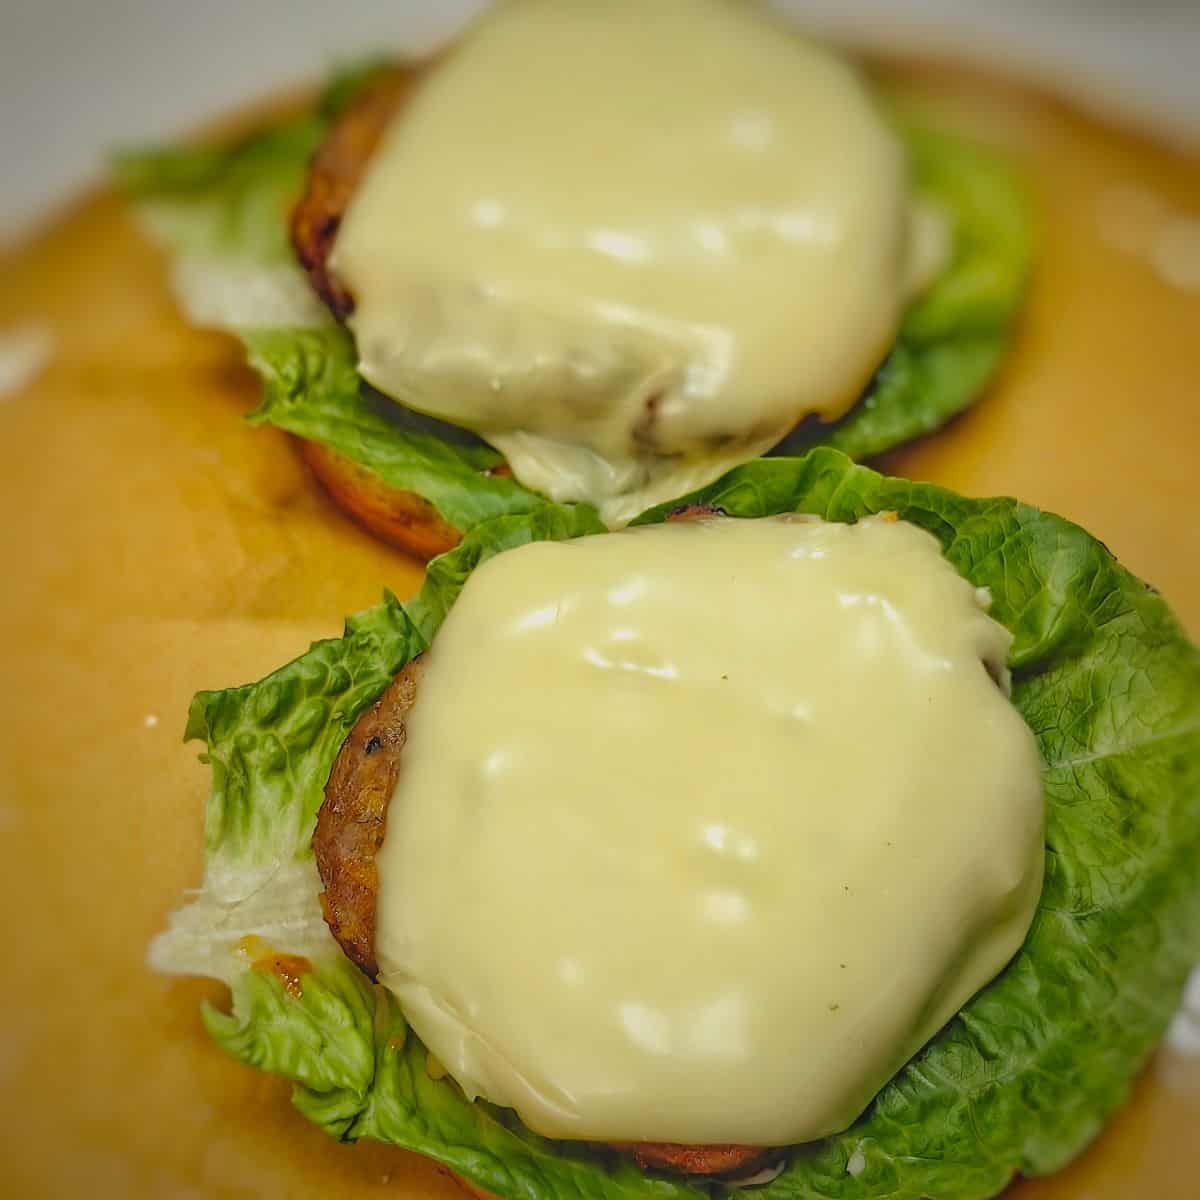 air fryer turkey burgers with cheese on top of lettuce